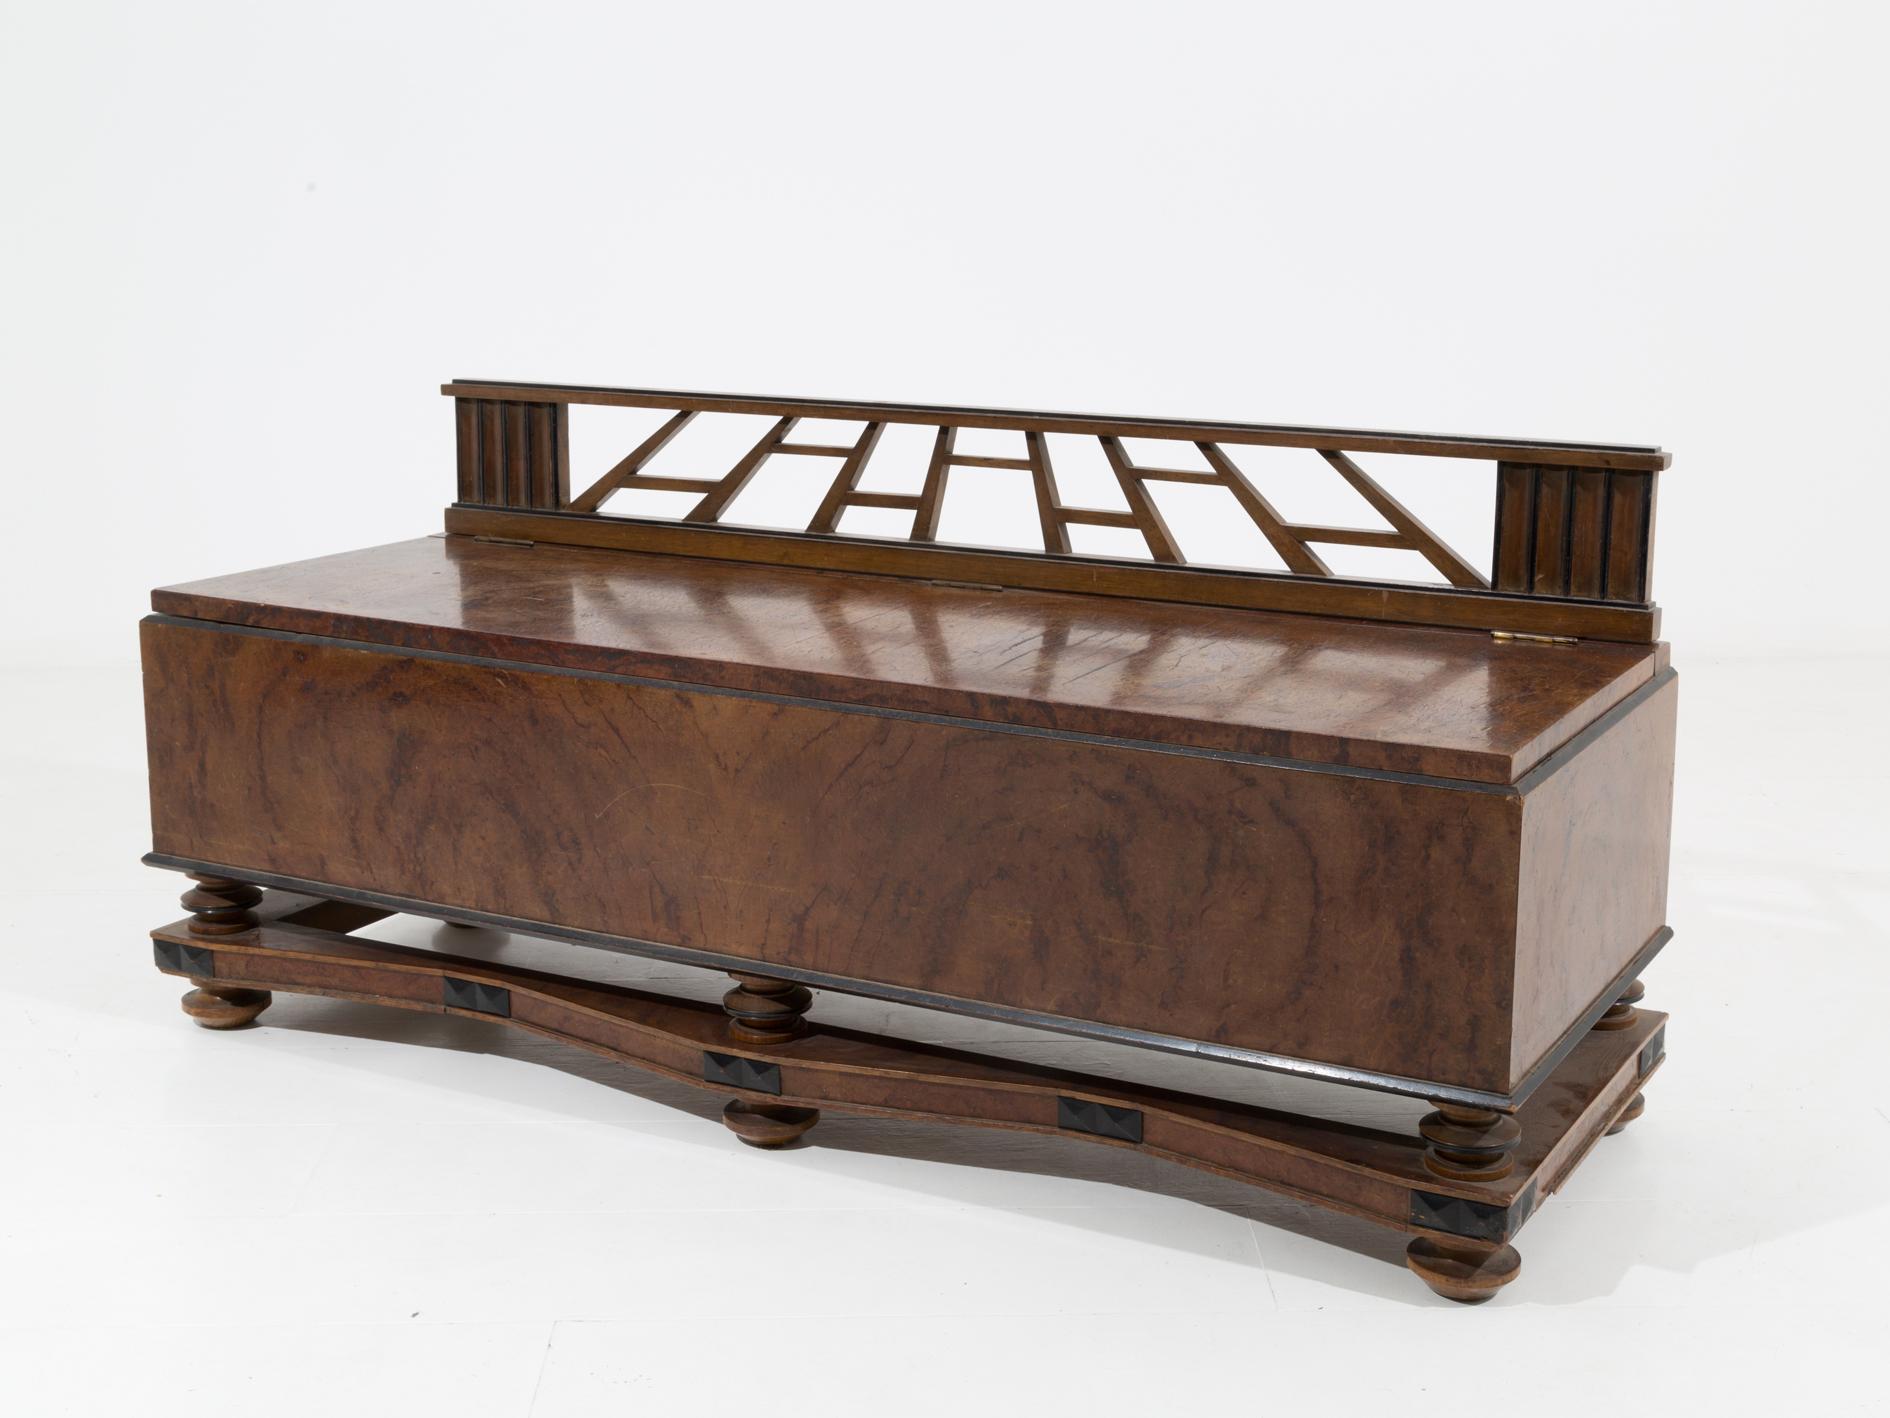 Sculptural bench made of walnut briar attributed to the architect Gio Ponti. The bench dates back to about 30 years. Its elegance is also given by its ebonized and sculptural wood inlays. The bench can be opened with a door upwards. On request it is